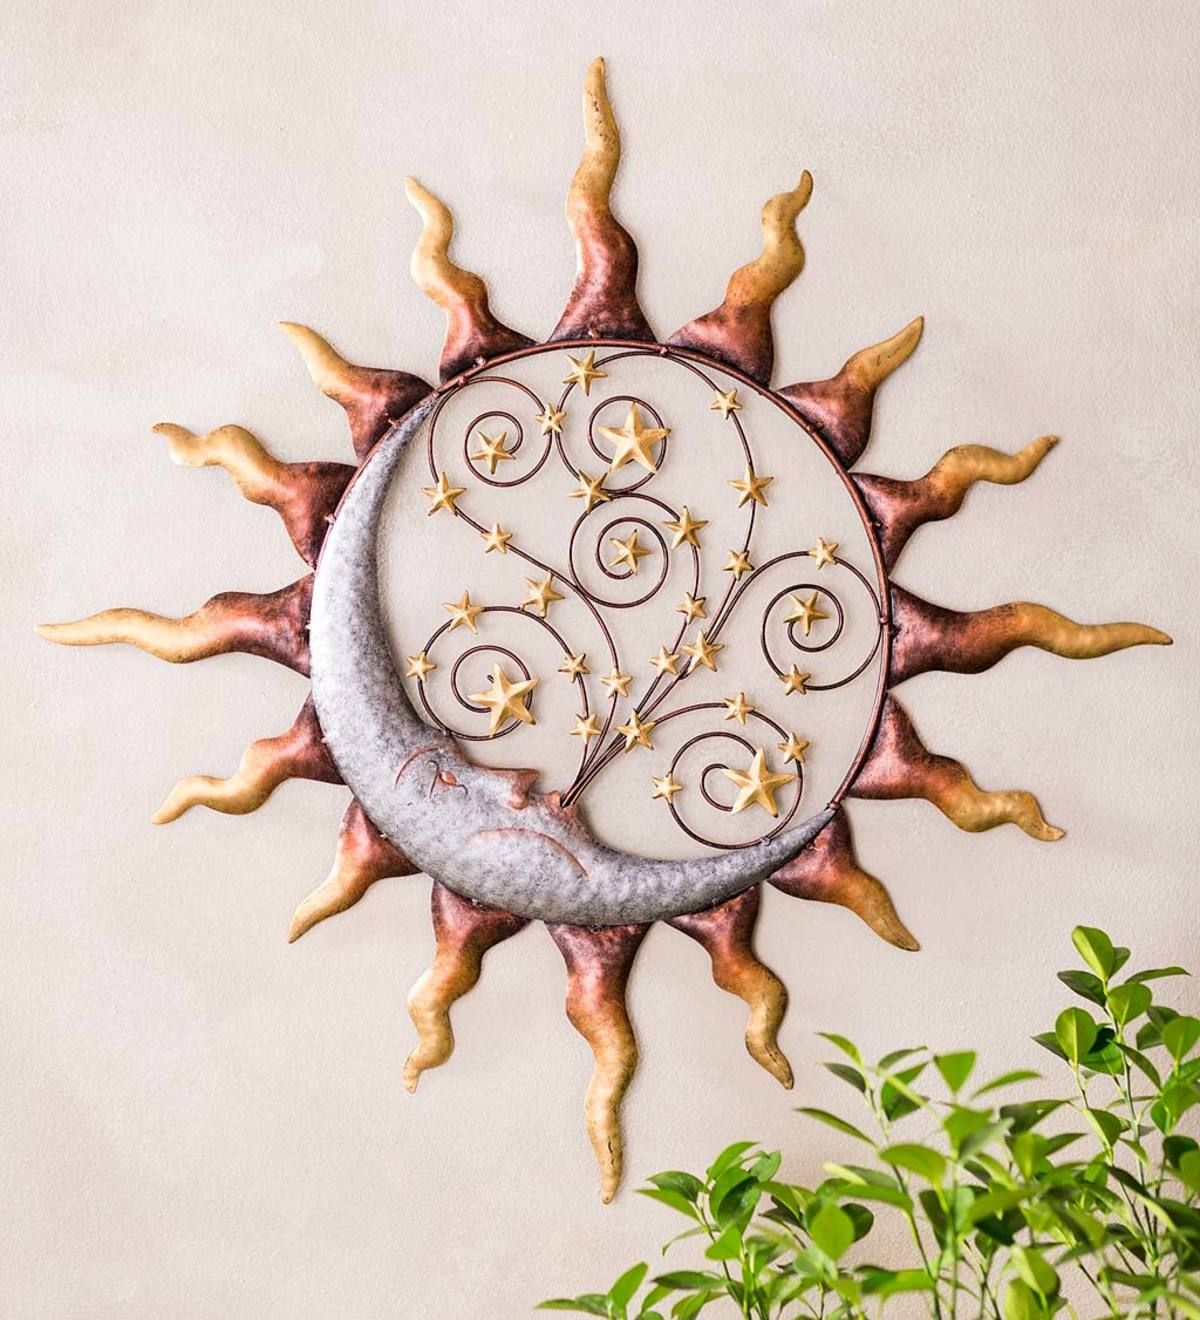 Handcrafted Metal Sun, Stars And Blowing Moon Wall Art | Wind And Weather With Sun Moon Star Wall Art (View 5 of 15)